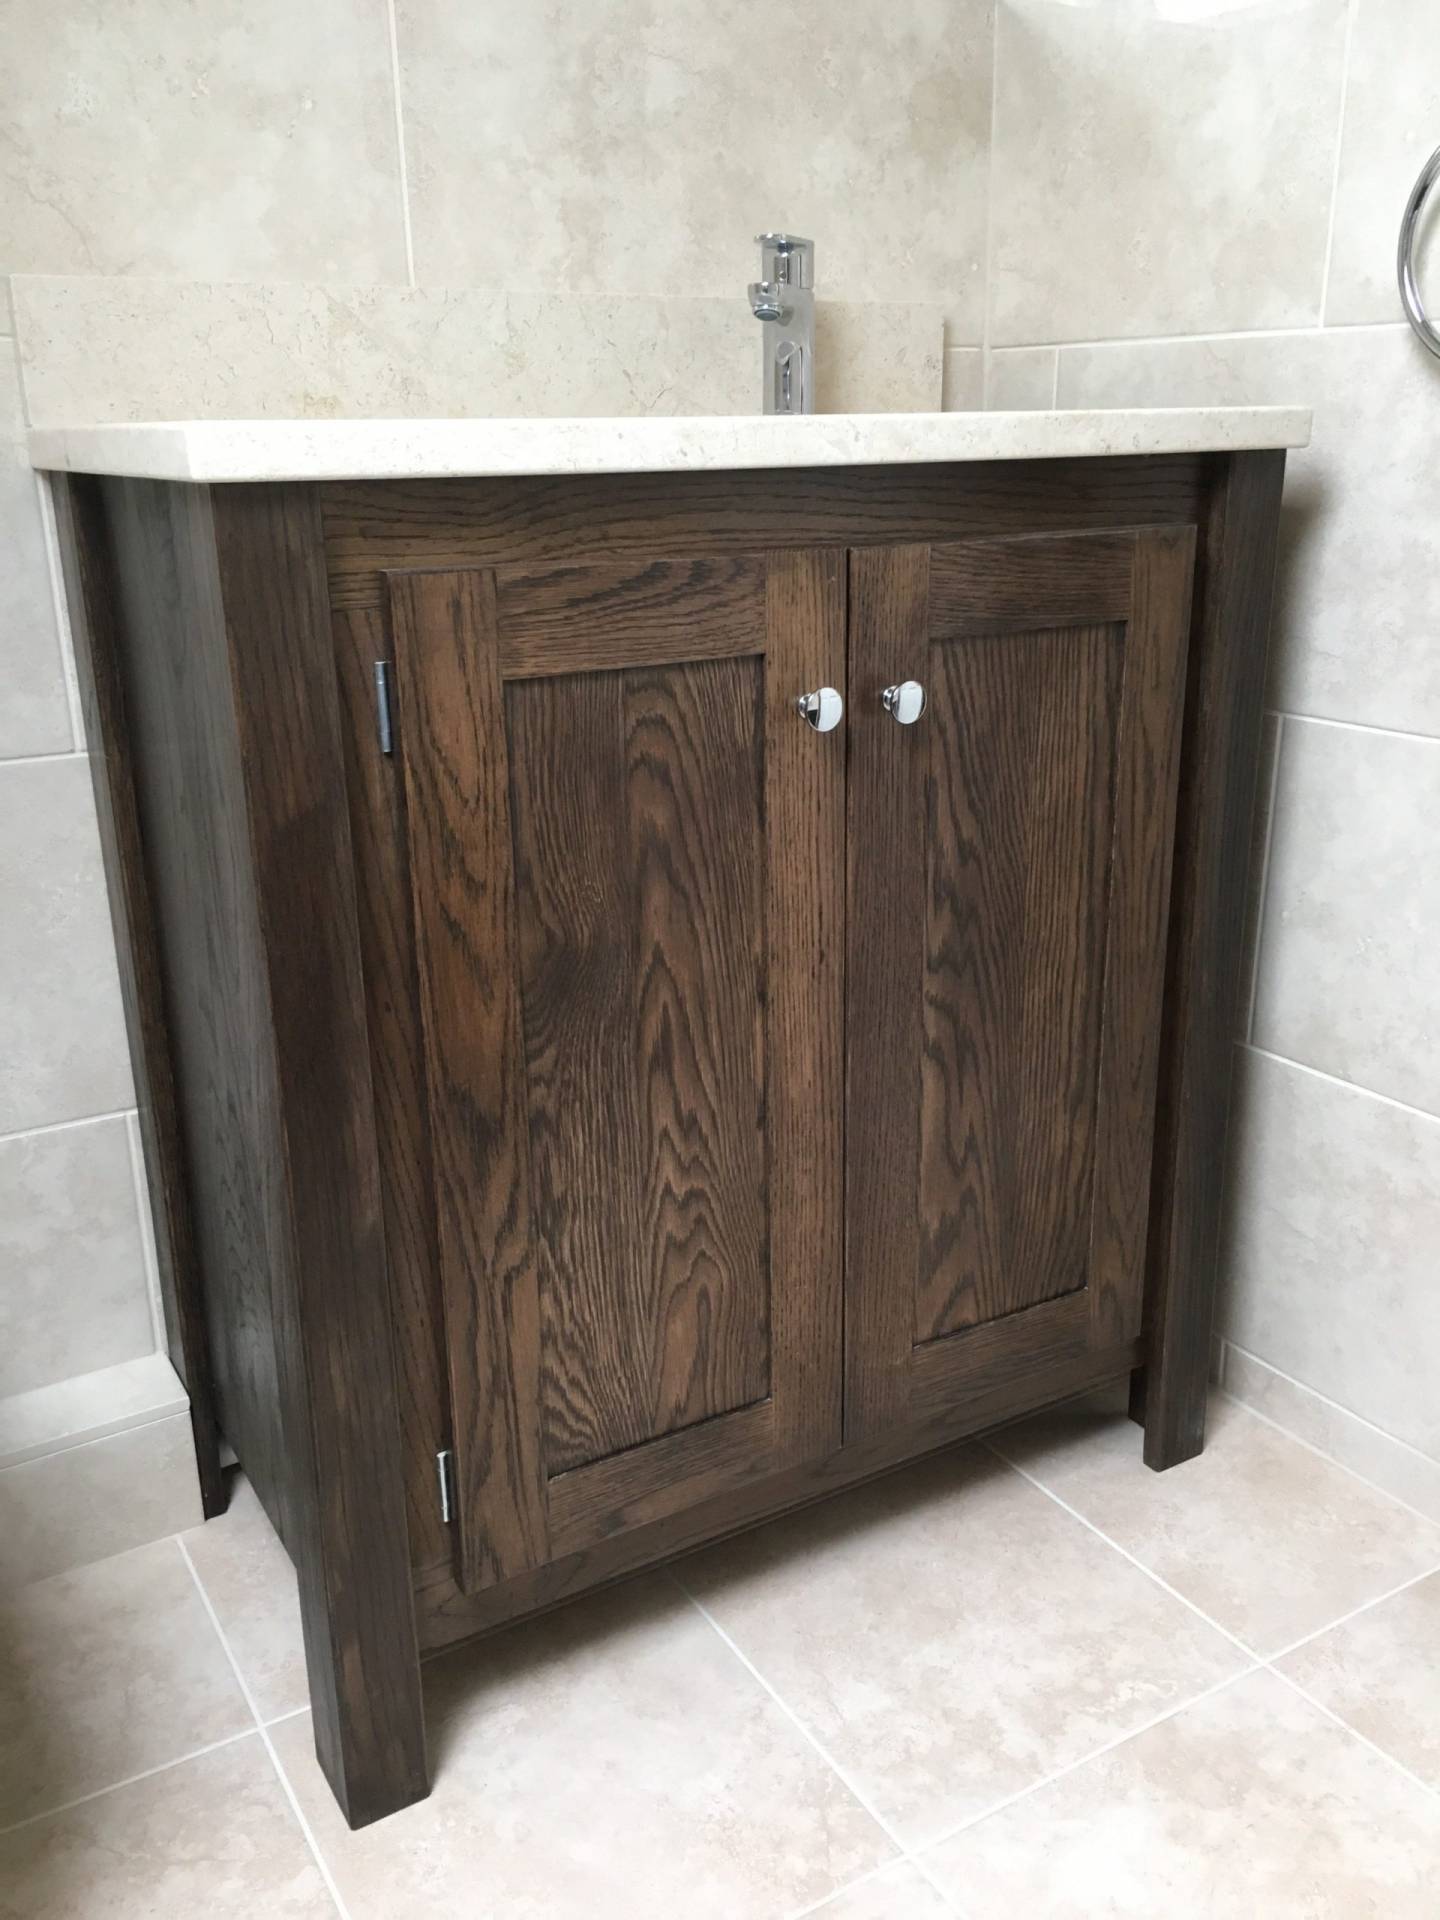 Wood stained Undercounter Vanity Unit